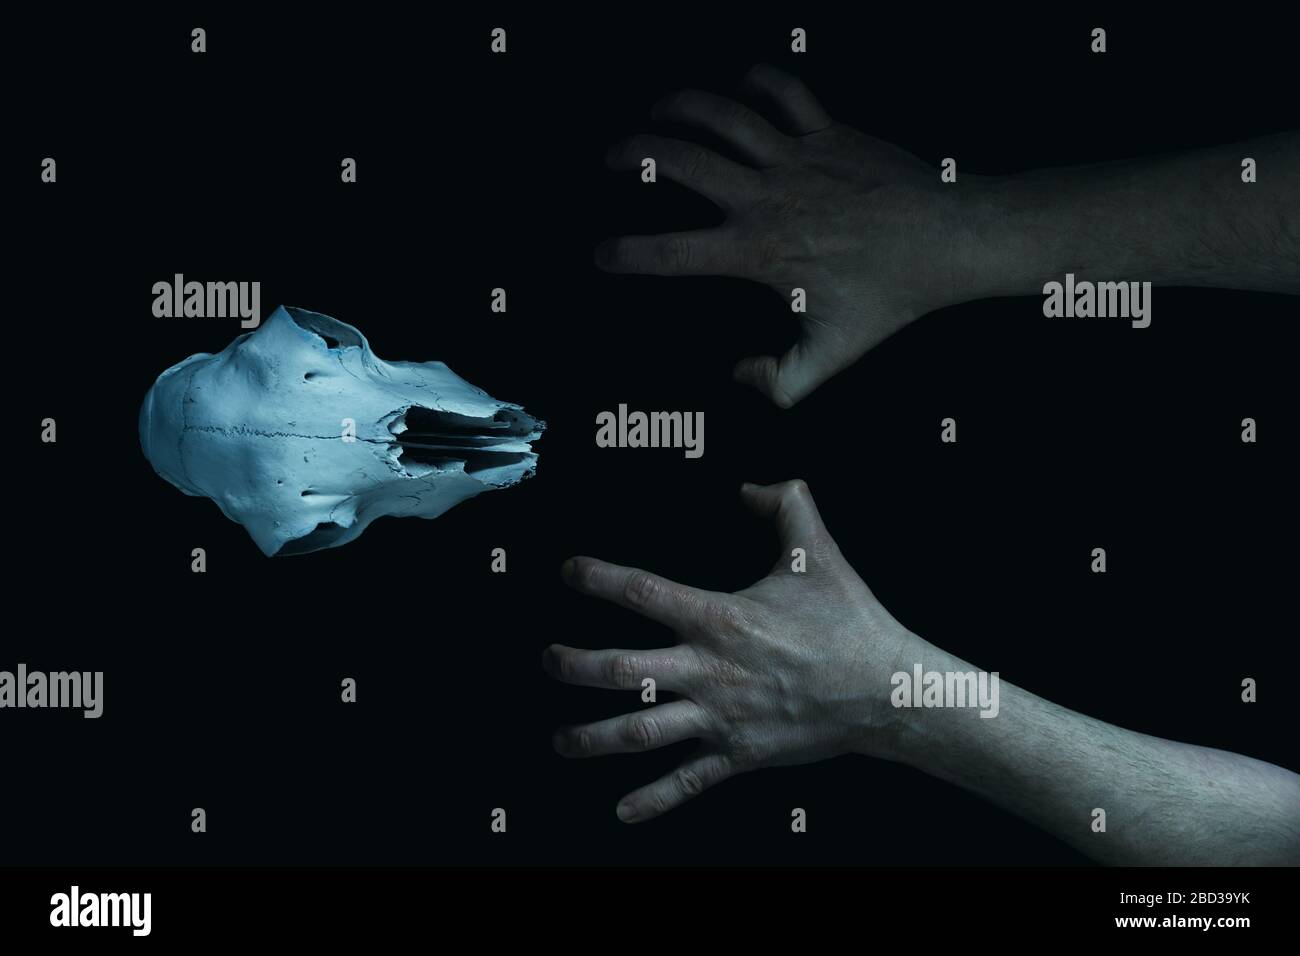 A dark, scary edit of mans hands grasping at an animal skull isolated on a black background Stock Photo